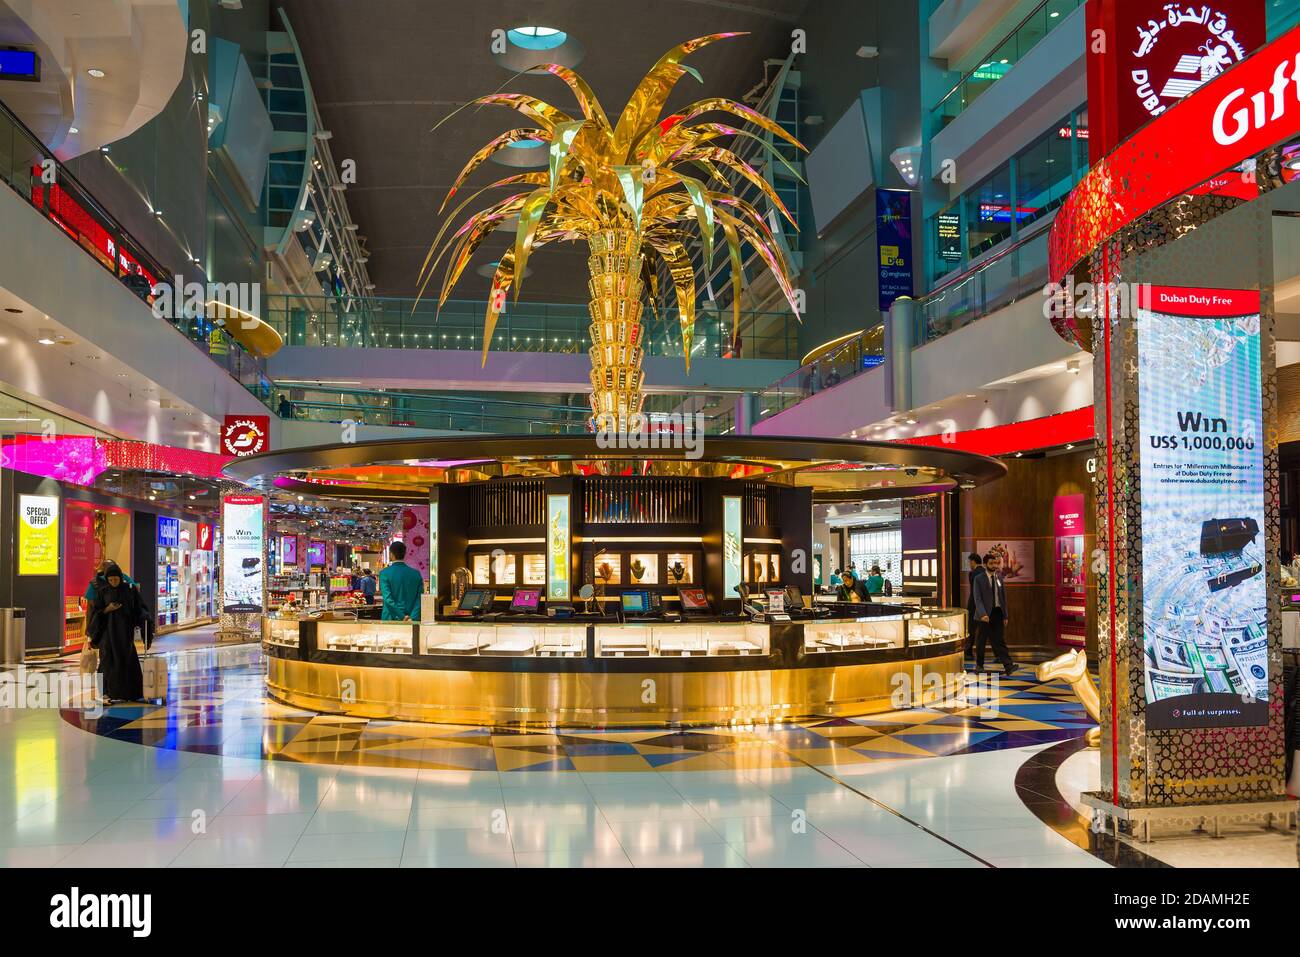 DUBAI, UAE - FEBRUARY 02, 2020: Golden Palm tree above the jewelry section of the Duty Free store in the transit area of Dubai Airport Stock Photo